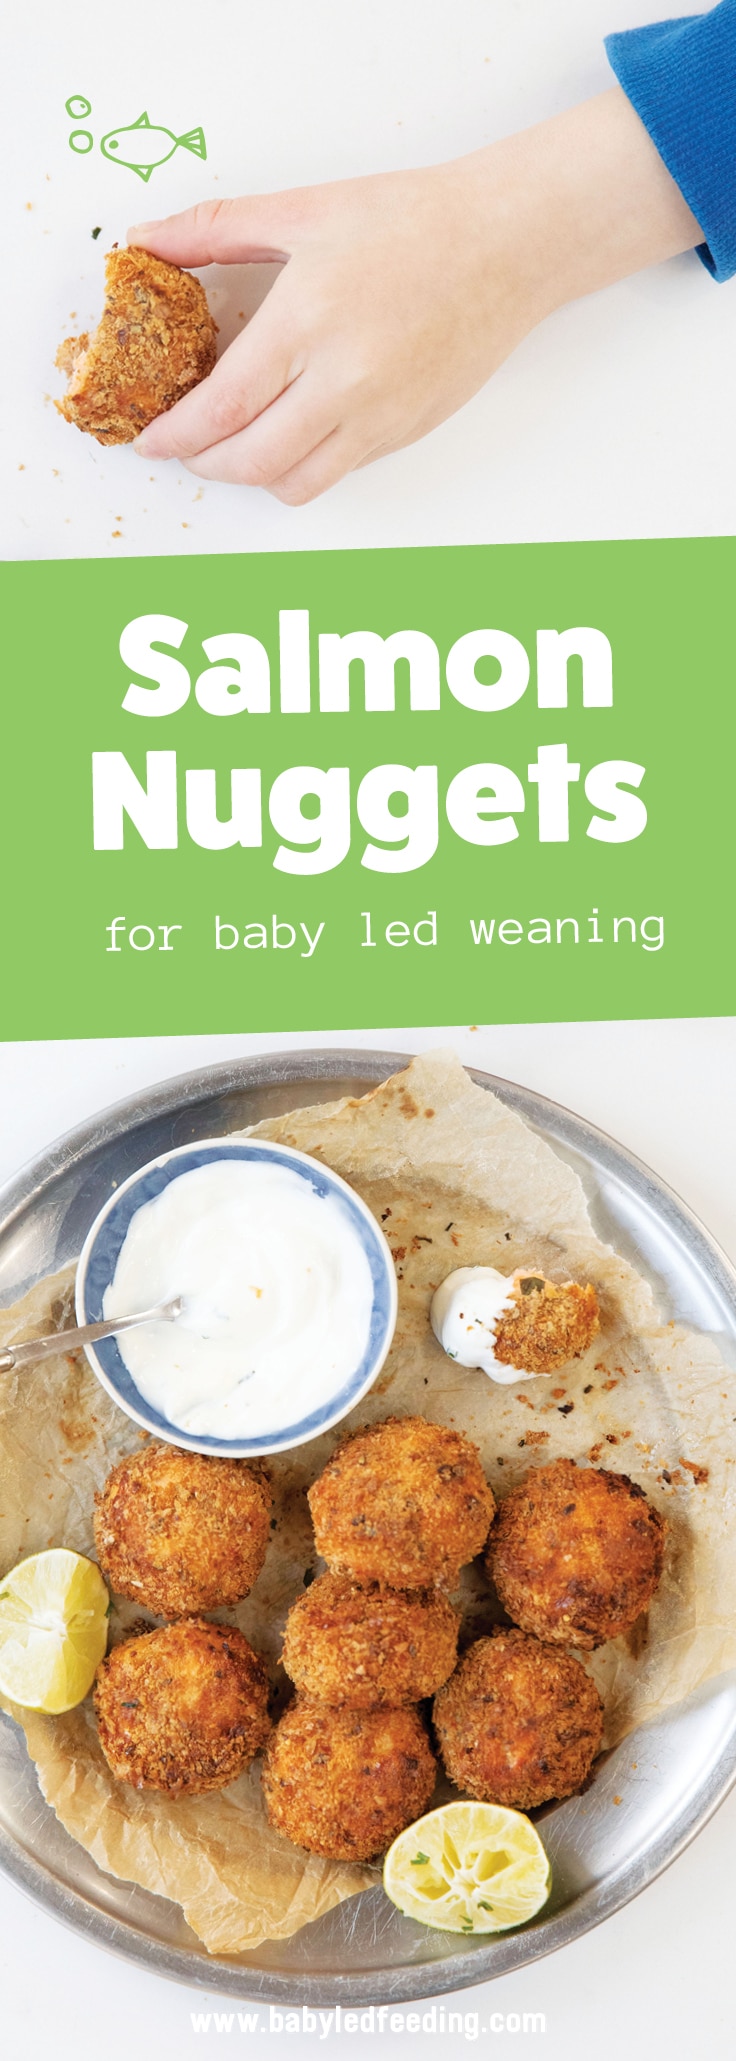 Easy Salmon Nugget Recipe for Baby Led Weaning and Toddlers. This healthy recipe for kids is loaded with omega 3s, vitamin A, fiber, and vitamin K! Fresh salmon, nutrient packed spinach, and whole grain bread crumbs with a yogurt lime dipping sauce make this finger food an easy lunch or dinner choice for your little ones. Freezer friendly, low sodium, and free from refined sugars! It's like a homemade fish stick but WAY better!